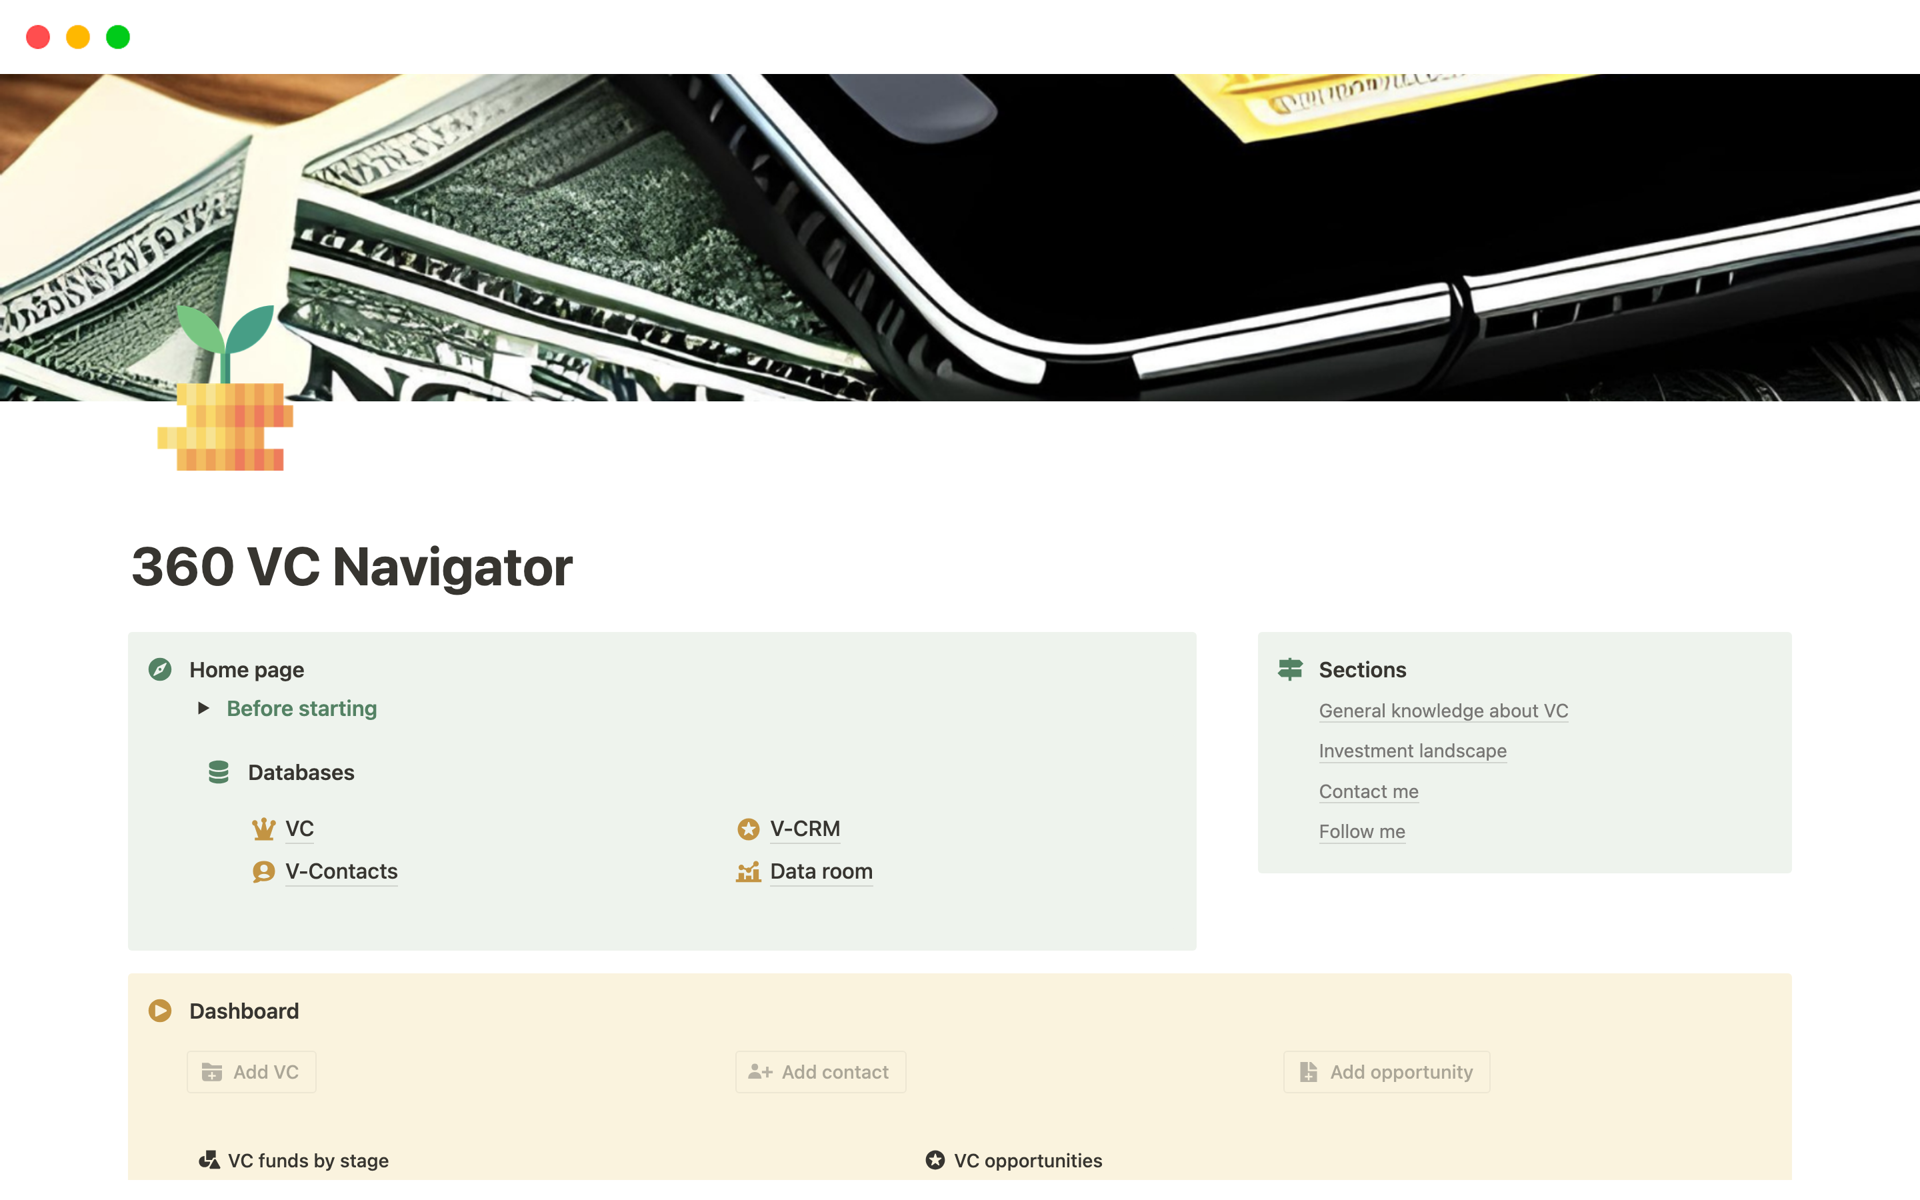 360 VC Navigator: Your one-stop gateway to 180+ top venture capitalists, streamlined fundraising, and engaging VC connections!